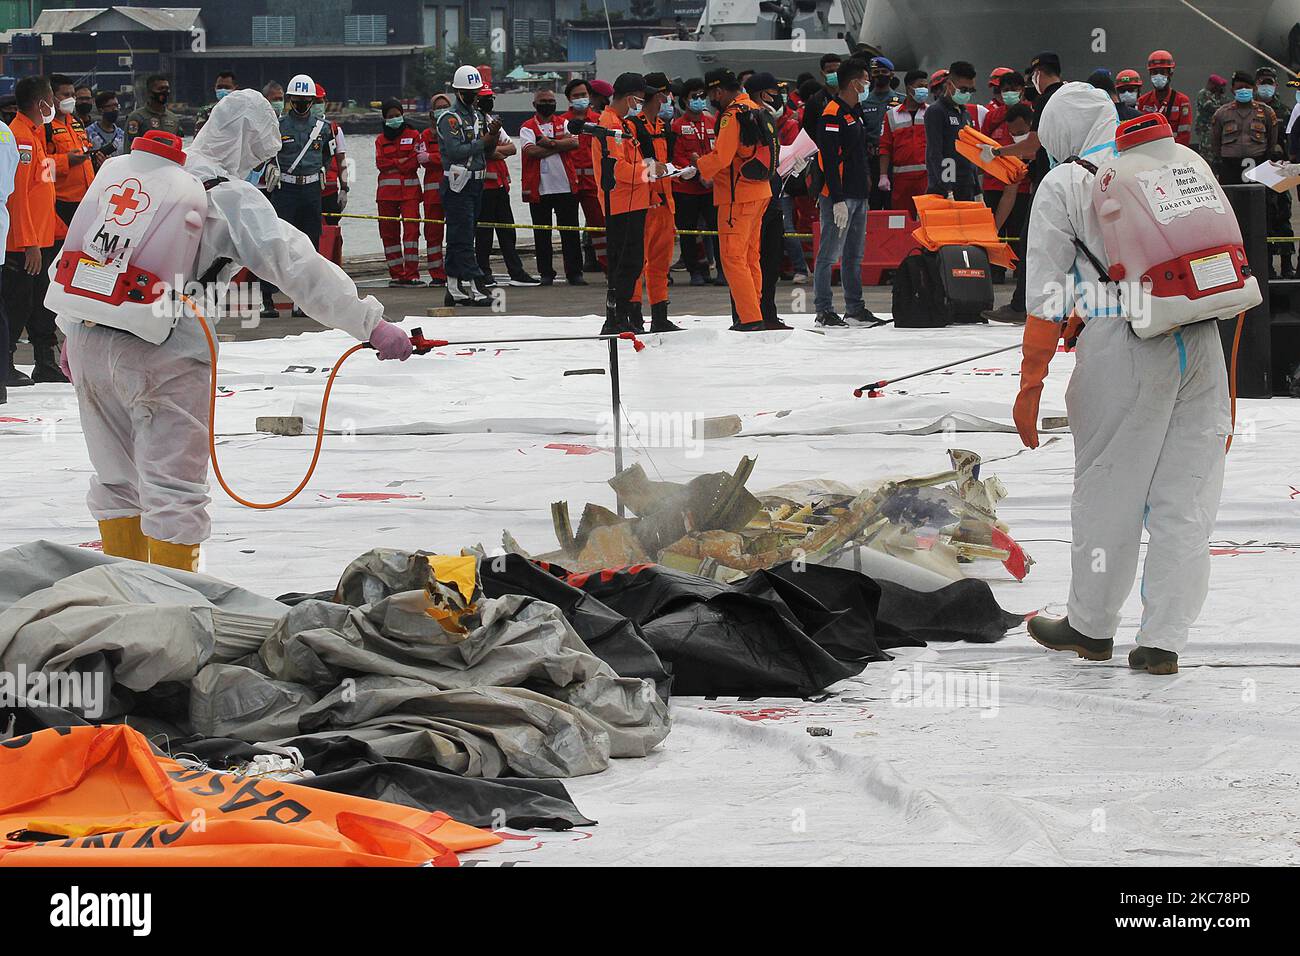 Officers spray disinfectant liquid to the Sriwijaya Air plane's debris was collected at the evacuation center located at Port of Tanjung Priok on January 10, 2021. The plane with 62 passengers with flight number SJ 182, which was scheduled to fly from Jakarta to Pontianak, crashed into the sea located in the north of Jakarta shortly after takeoff from Soekarno-Hatta airport on Saturday, January 9, 2021 (Photo by Eddy Purwanto/NurPhoto) Stock Photo